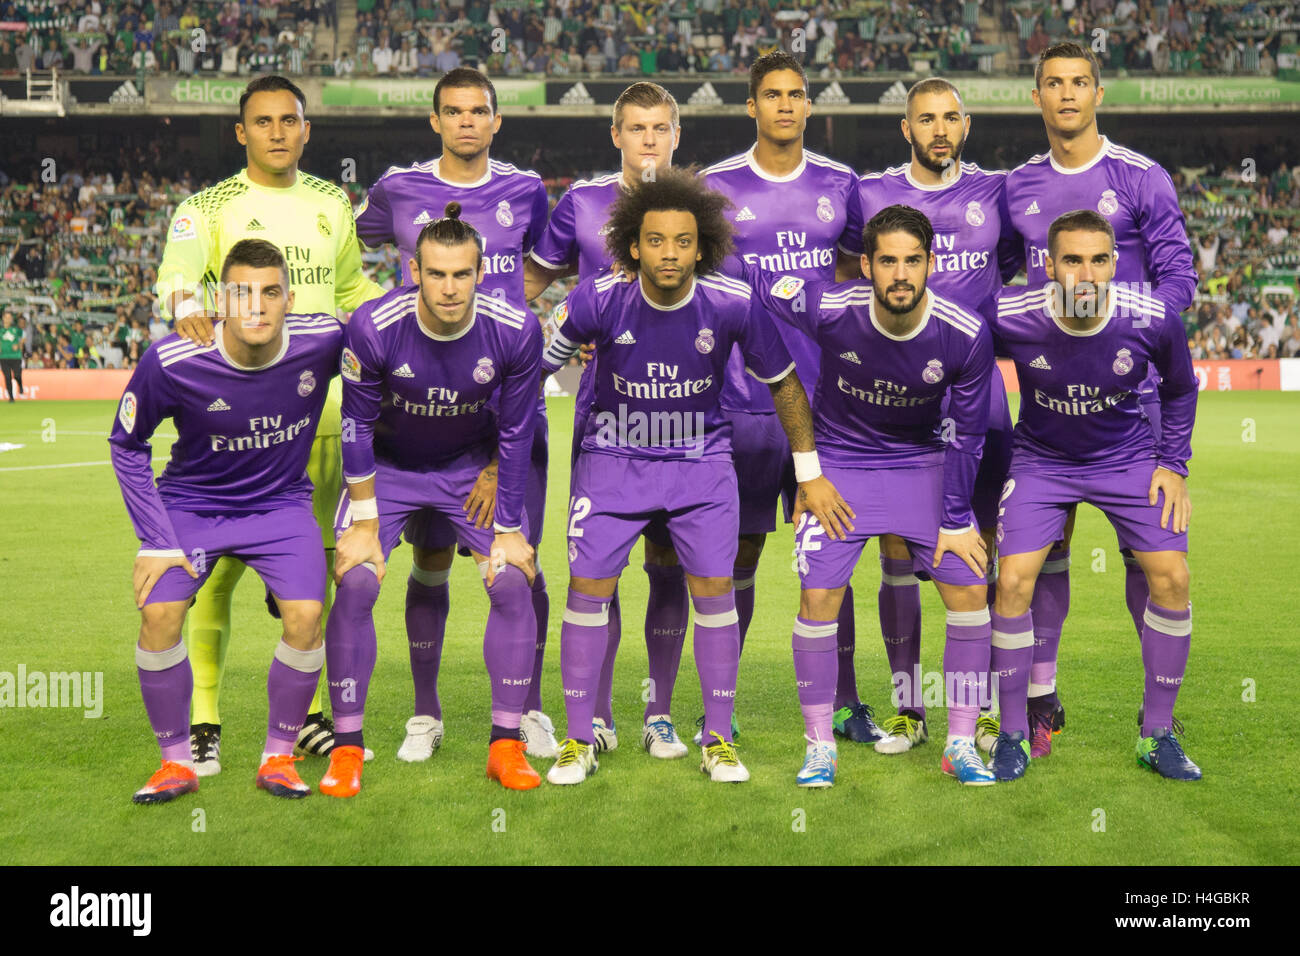 Seville, Spain. 15th October, 2016. - Real Madrid line up for team photo prior to the start the La Liga  match between  Real Betis B. vs Real Madrid as part of La Liga at Estadio Benito Villamarin on October 15, 2016 in Seville Photo by Ismael Molina/ Photo Media Express/Alamy Live News Stock Photo